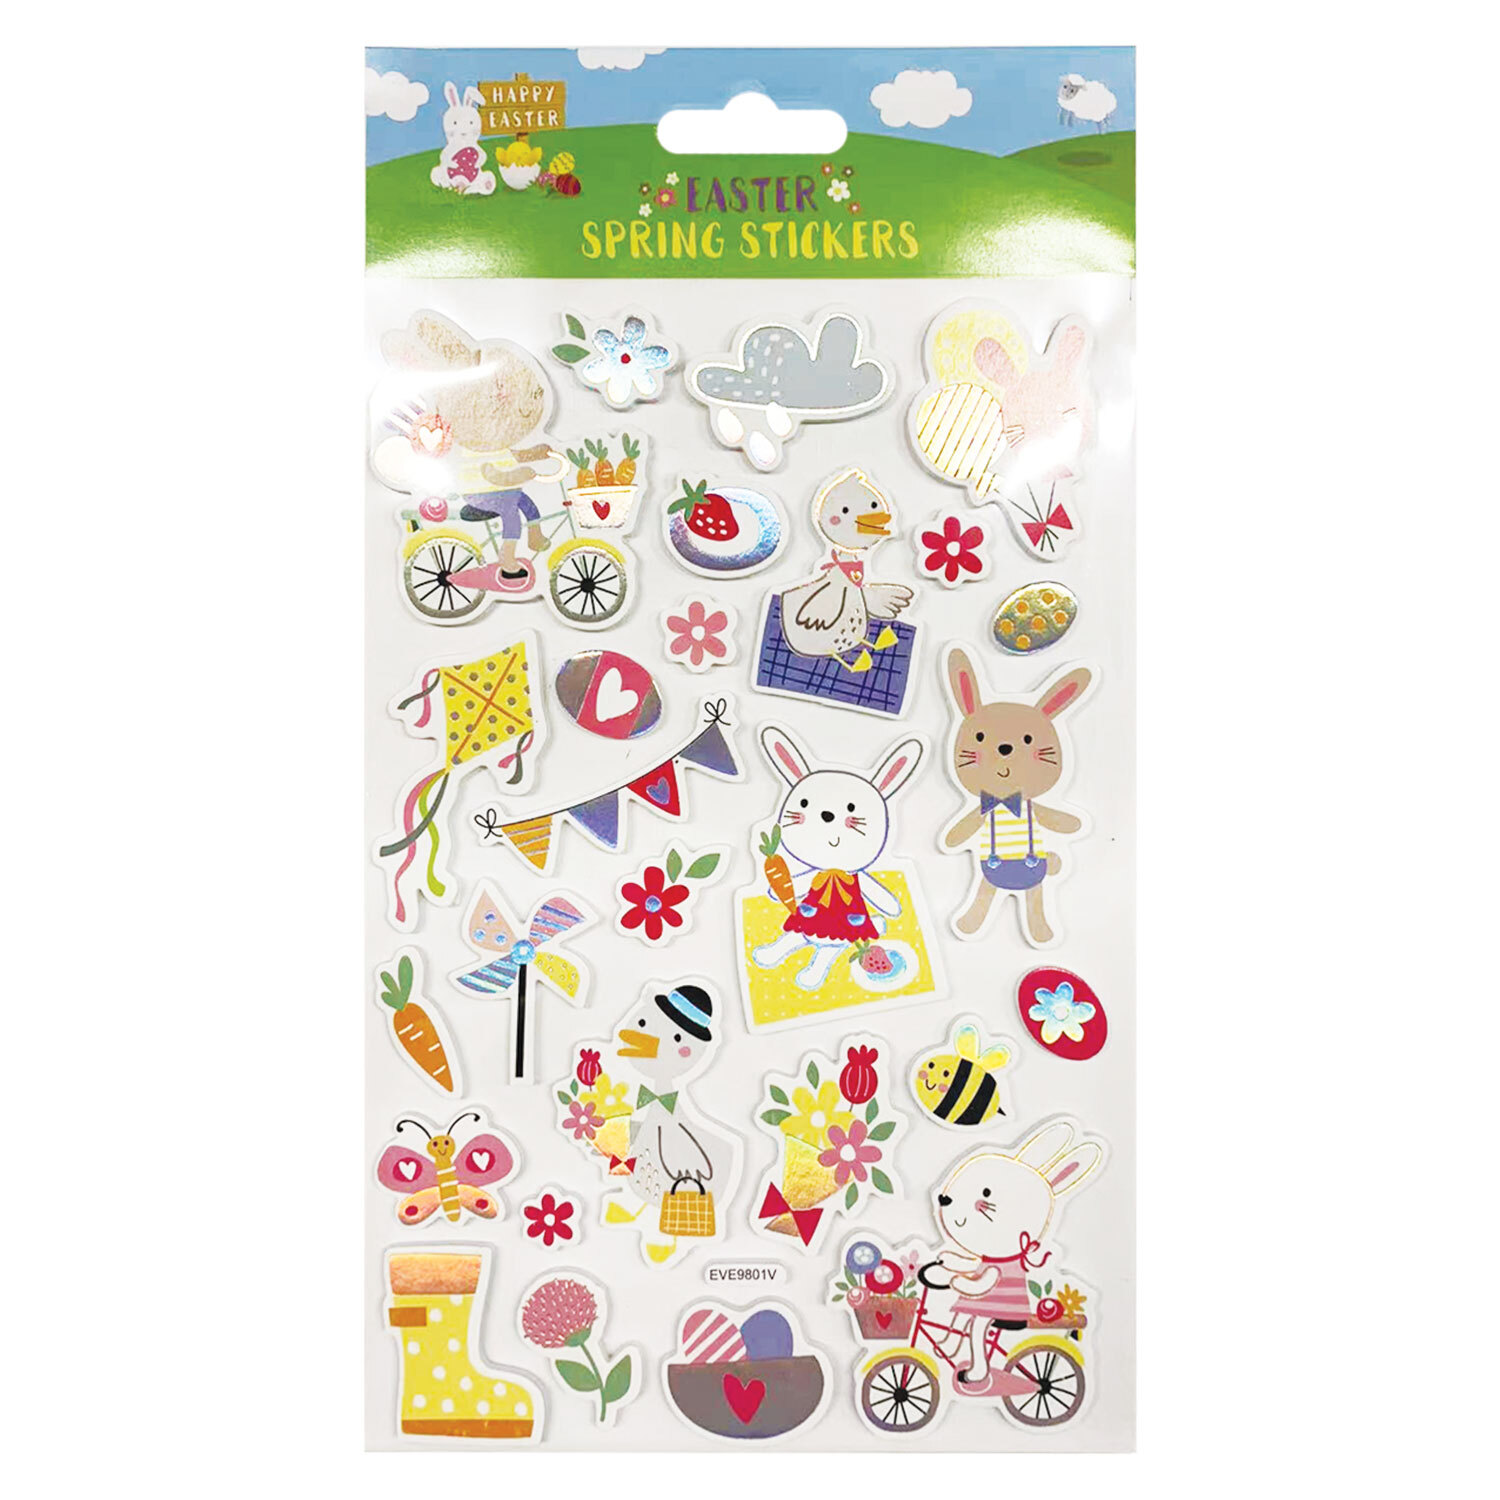 Easter Spring Stickers Image